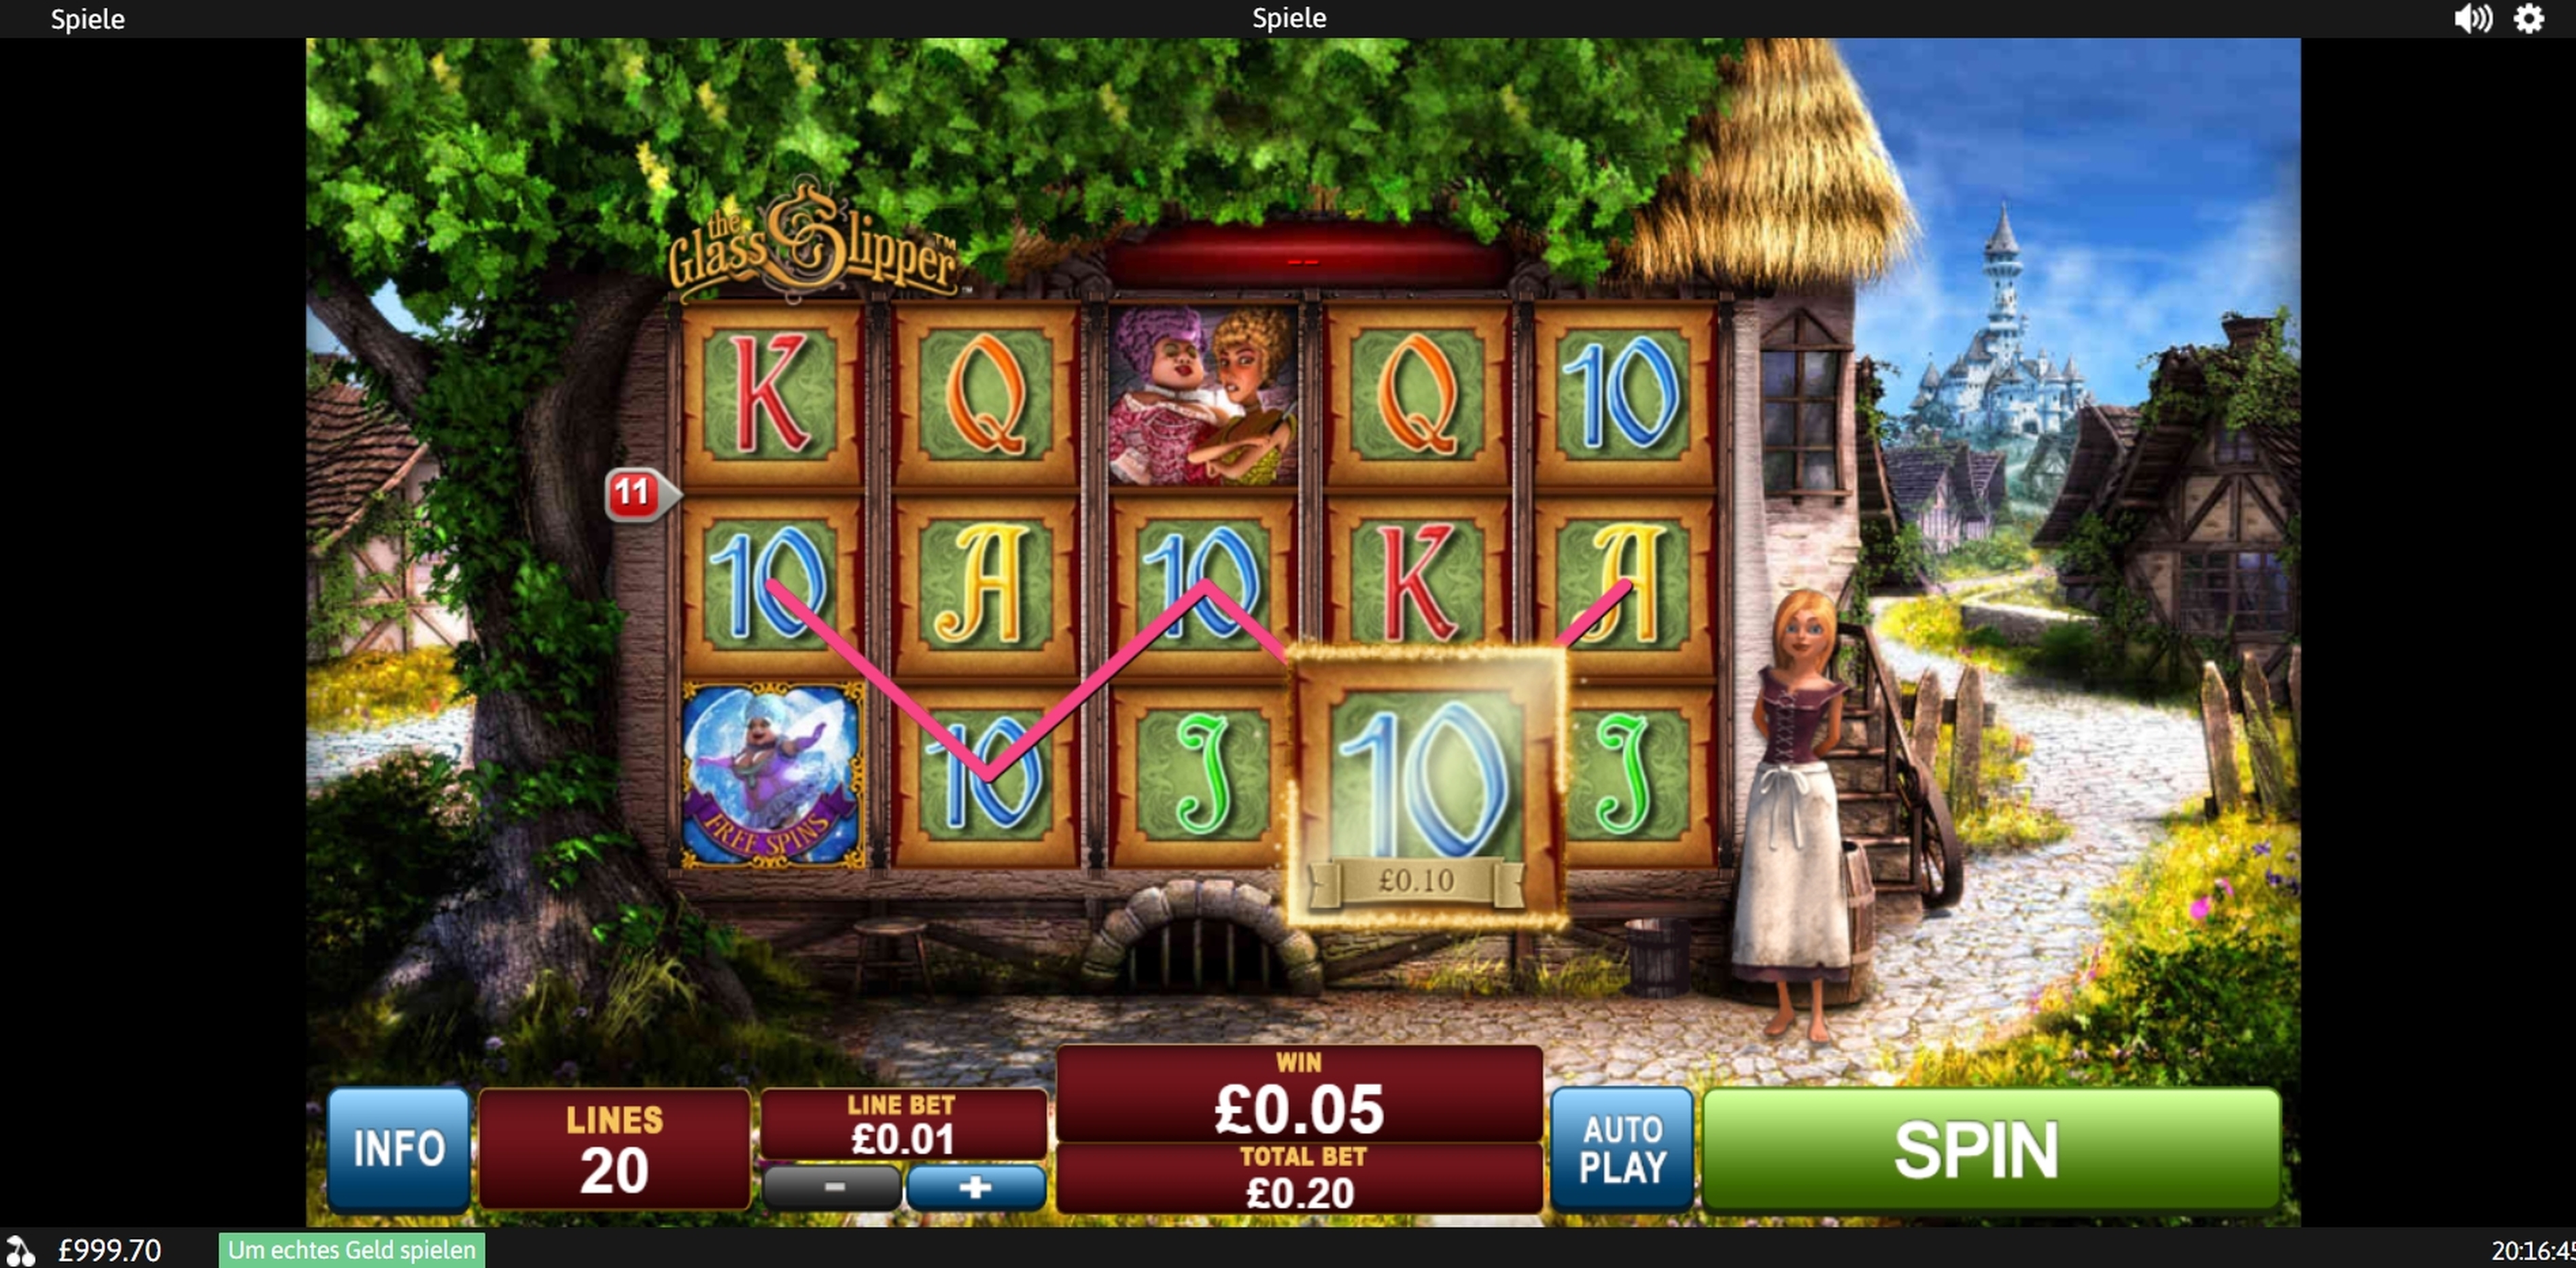 Win Money in The Glass Slipper Free Slot Game by SUNfox Games